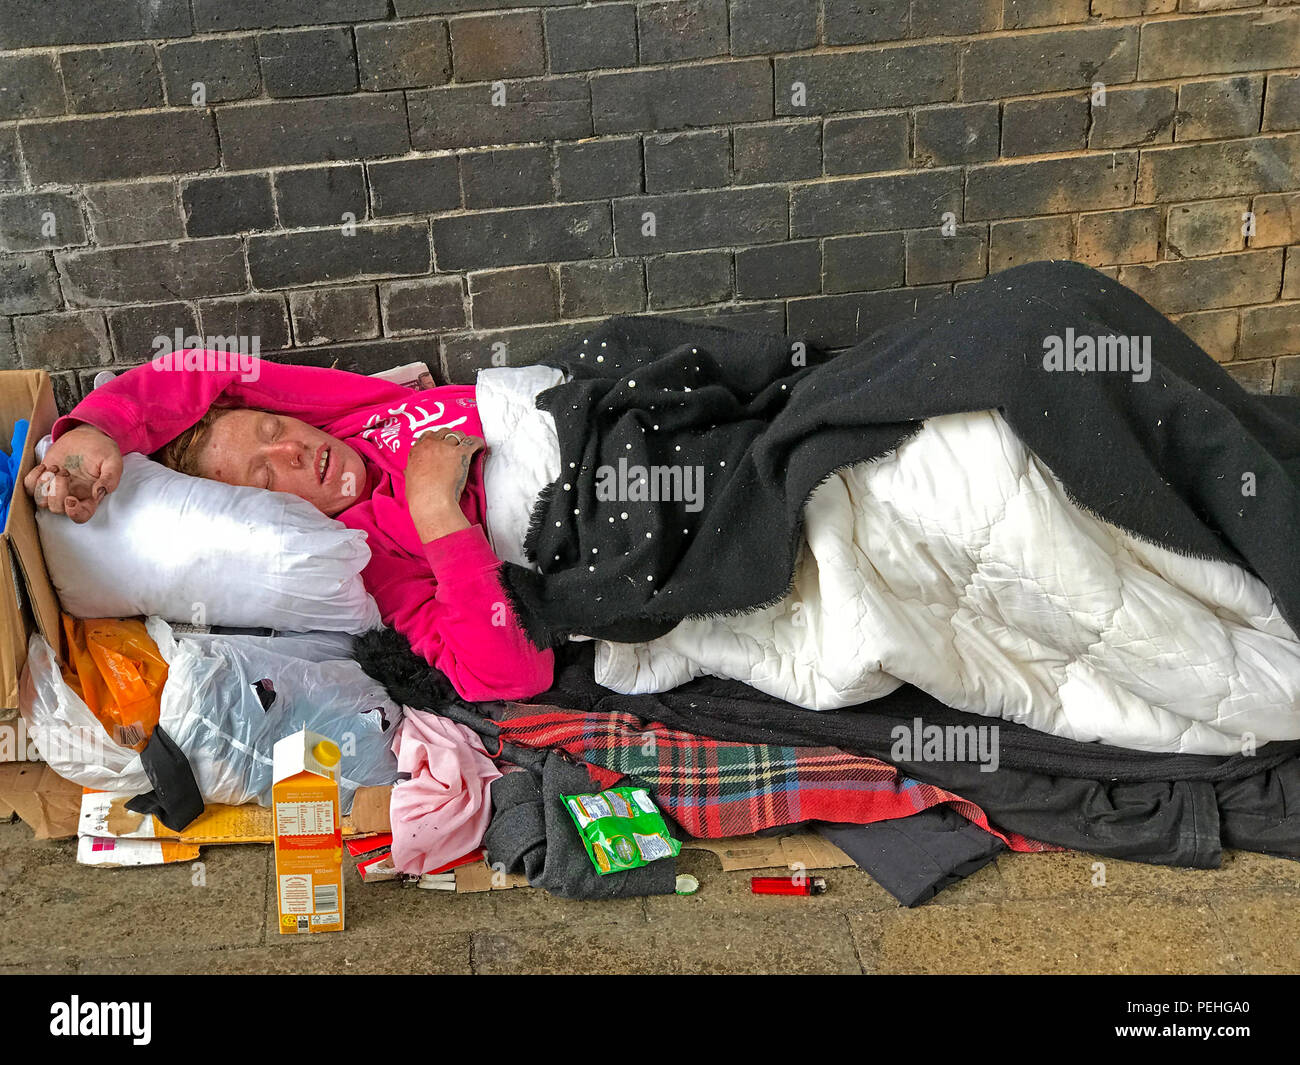 Rough sleeping homeless person, under a railway arch, Manchester, North West England, UK Stock Photo